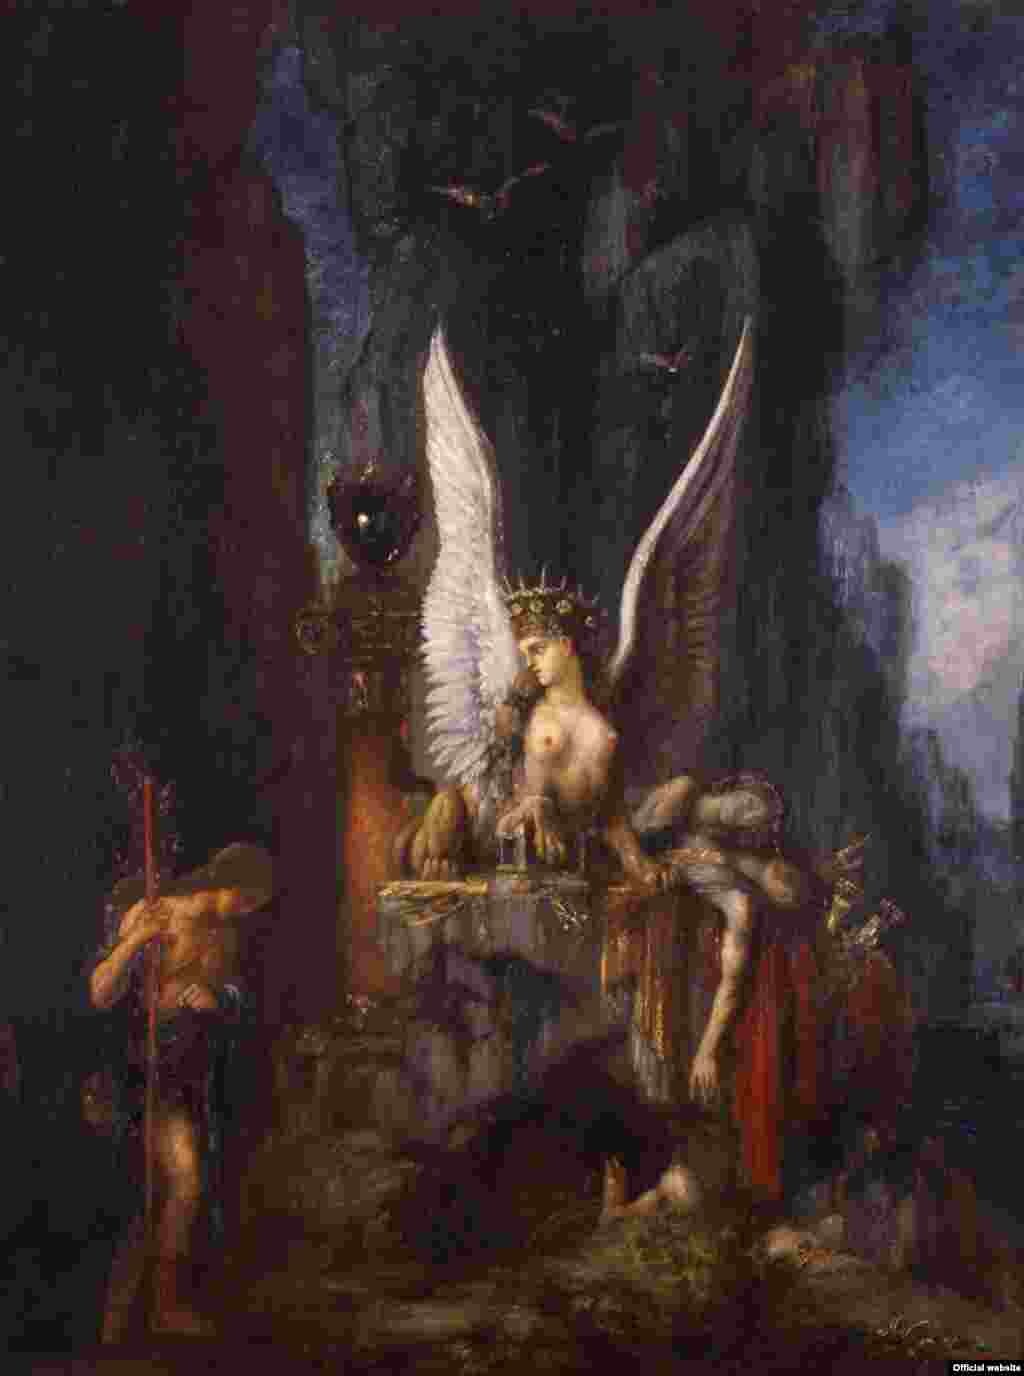 Germany - Exhibition „Battle of the Sexes”, Gustave Moreau (1826–1898), Oedipus the Wayfarer or Equality in the Face of Death, ca. 1888, Frankfurt